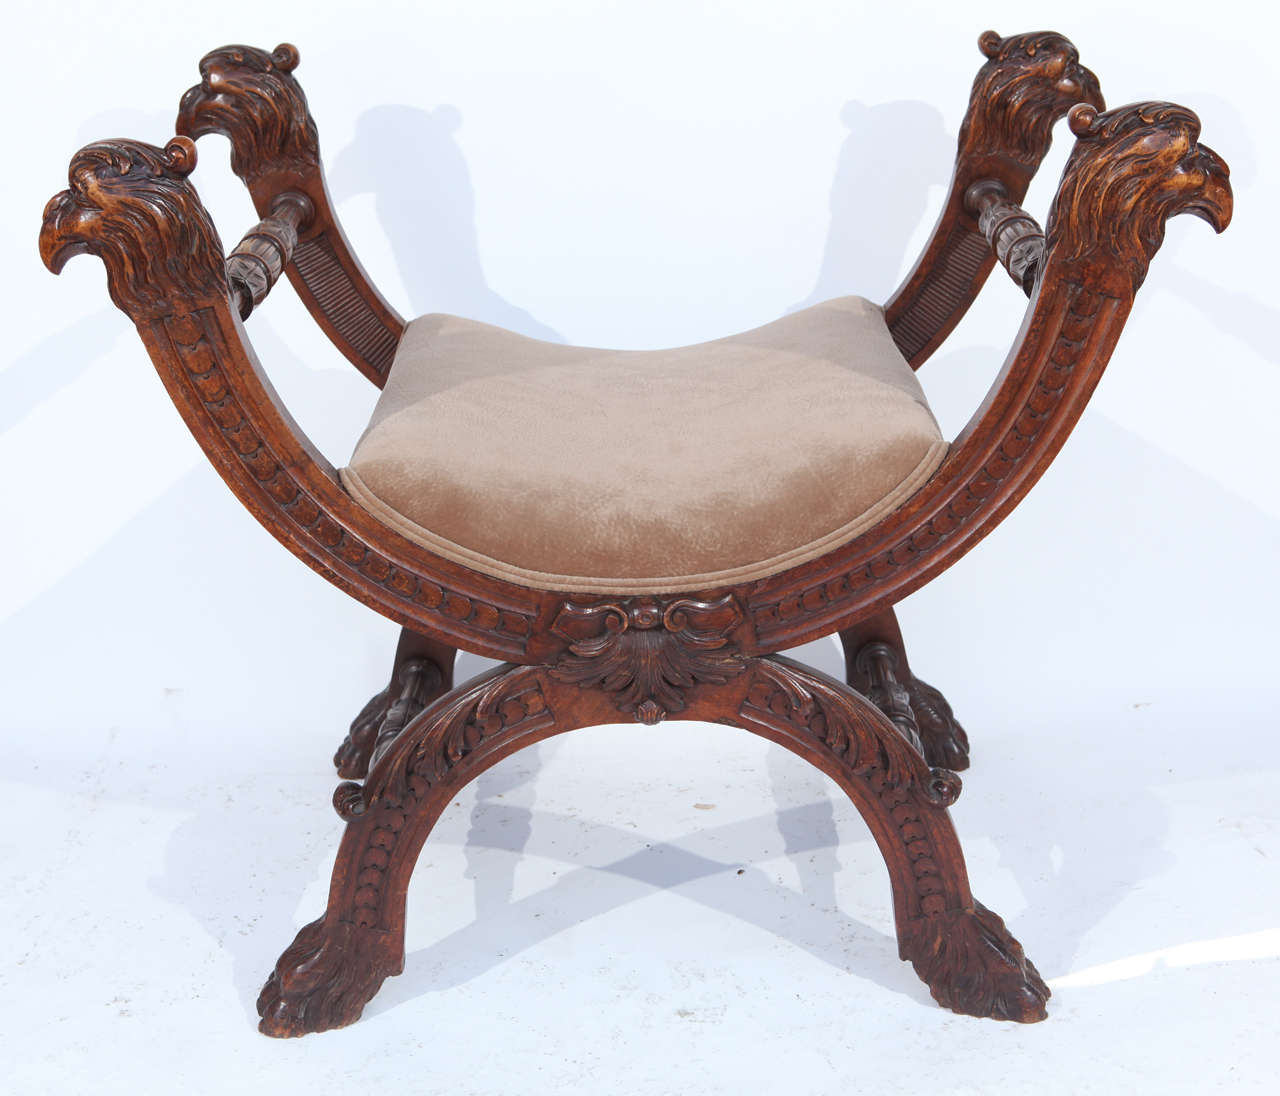 19th century Italian finely carved walnut stool with eagle heads and claw feet.